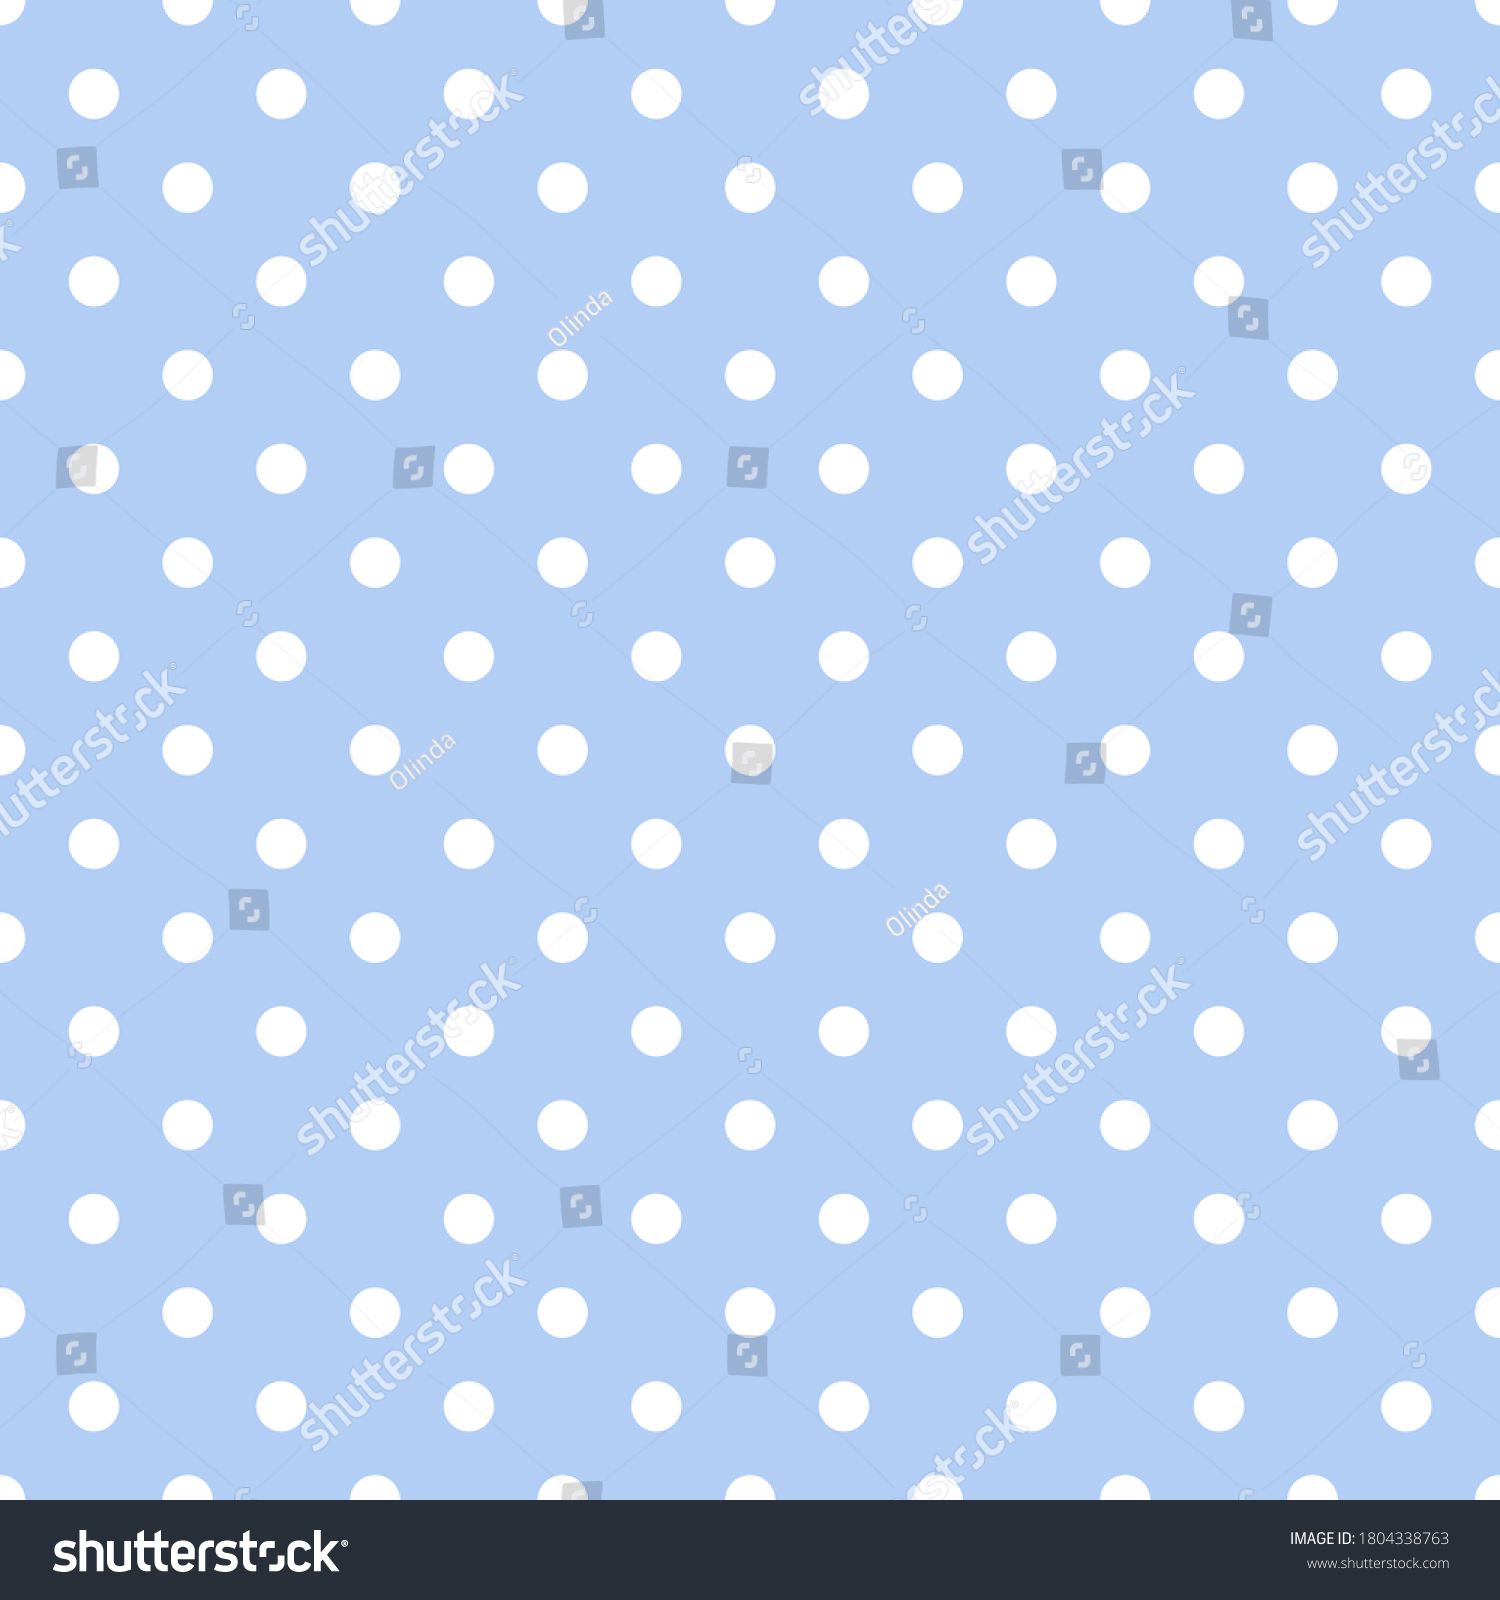 SVG of Seamless pattern white small polka dots on pastel blue background. Elegant print for fabric textile gift paper scrapbook wallpaper kids clothes nursery decor svg